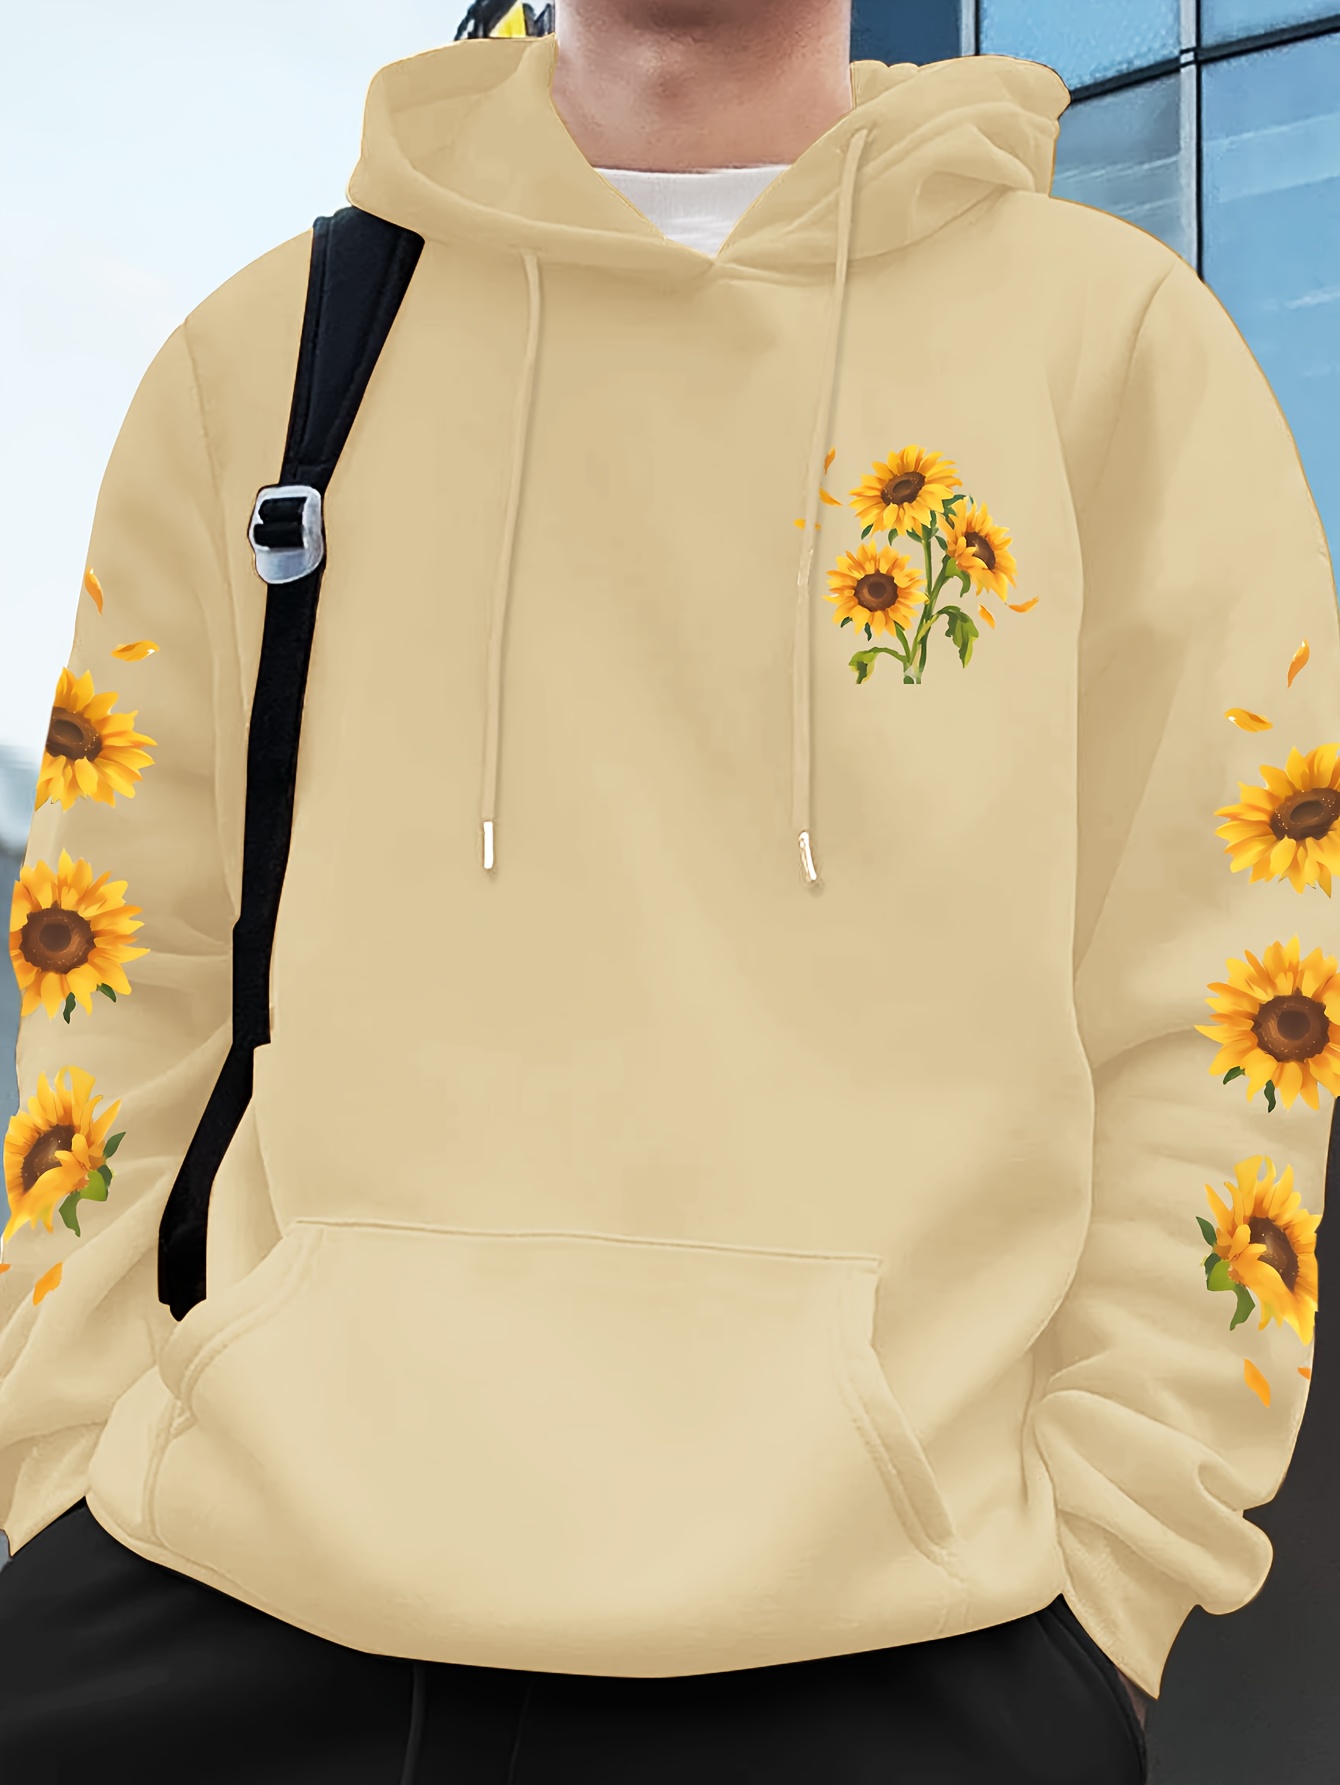 sunflower print mens pullover round neck hoodies with kangaroo pocket long sleeve hooded sweatshirt loose casual top for autumn winter mens clothing as gifts details 5